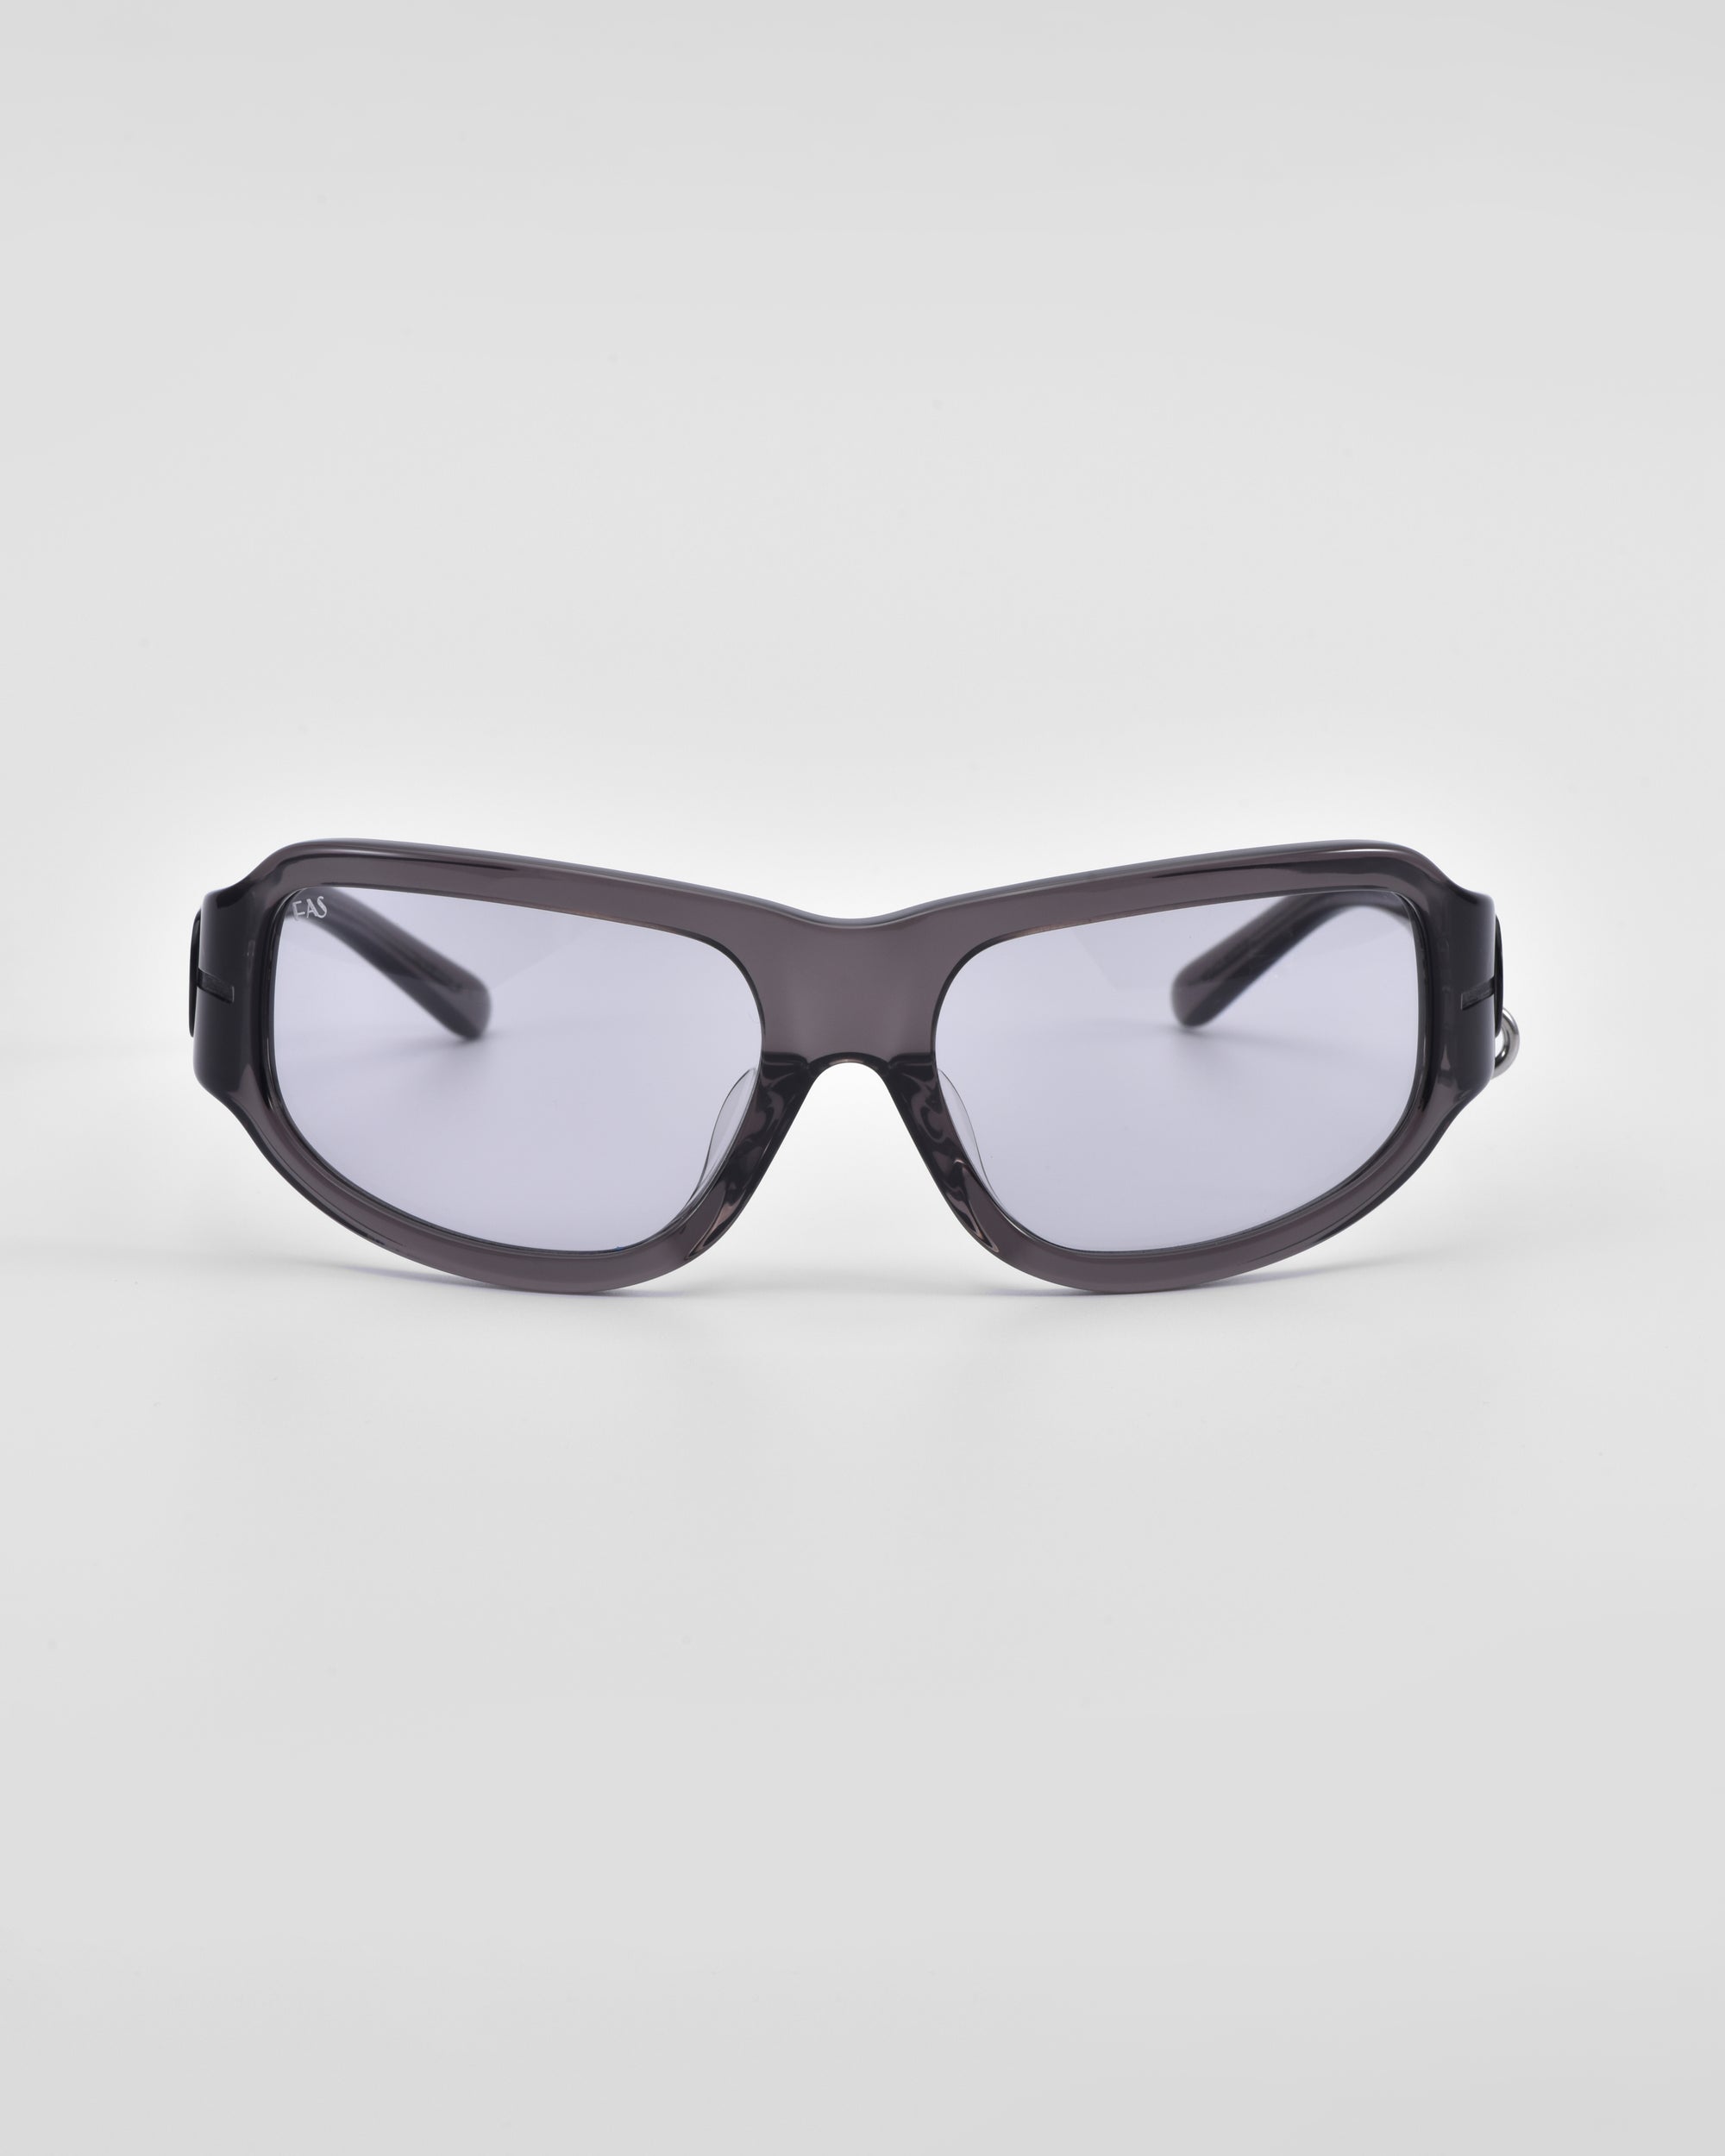 A pair of Raven sunglasses from For Art&#39;s Sake® in black, featuring slightly tinted lenses, is displayed against a plain white background. The Y2K wrap sunglasses boast a design with a curved frame and thick temples.